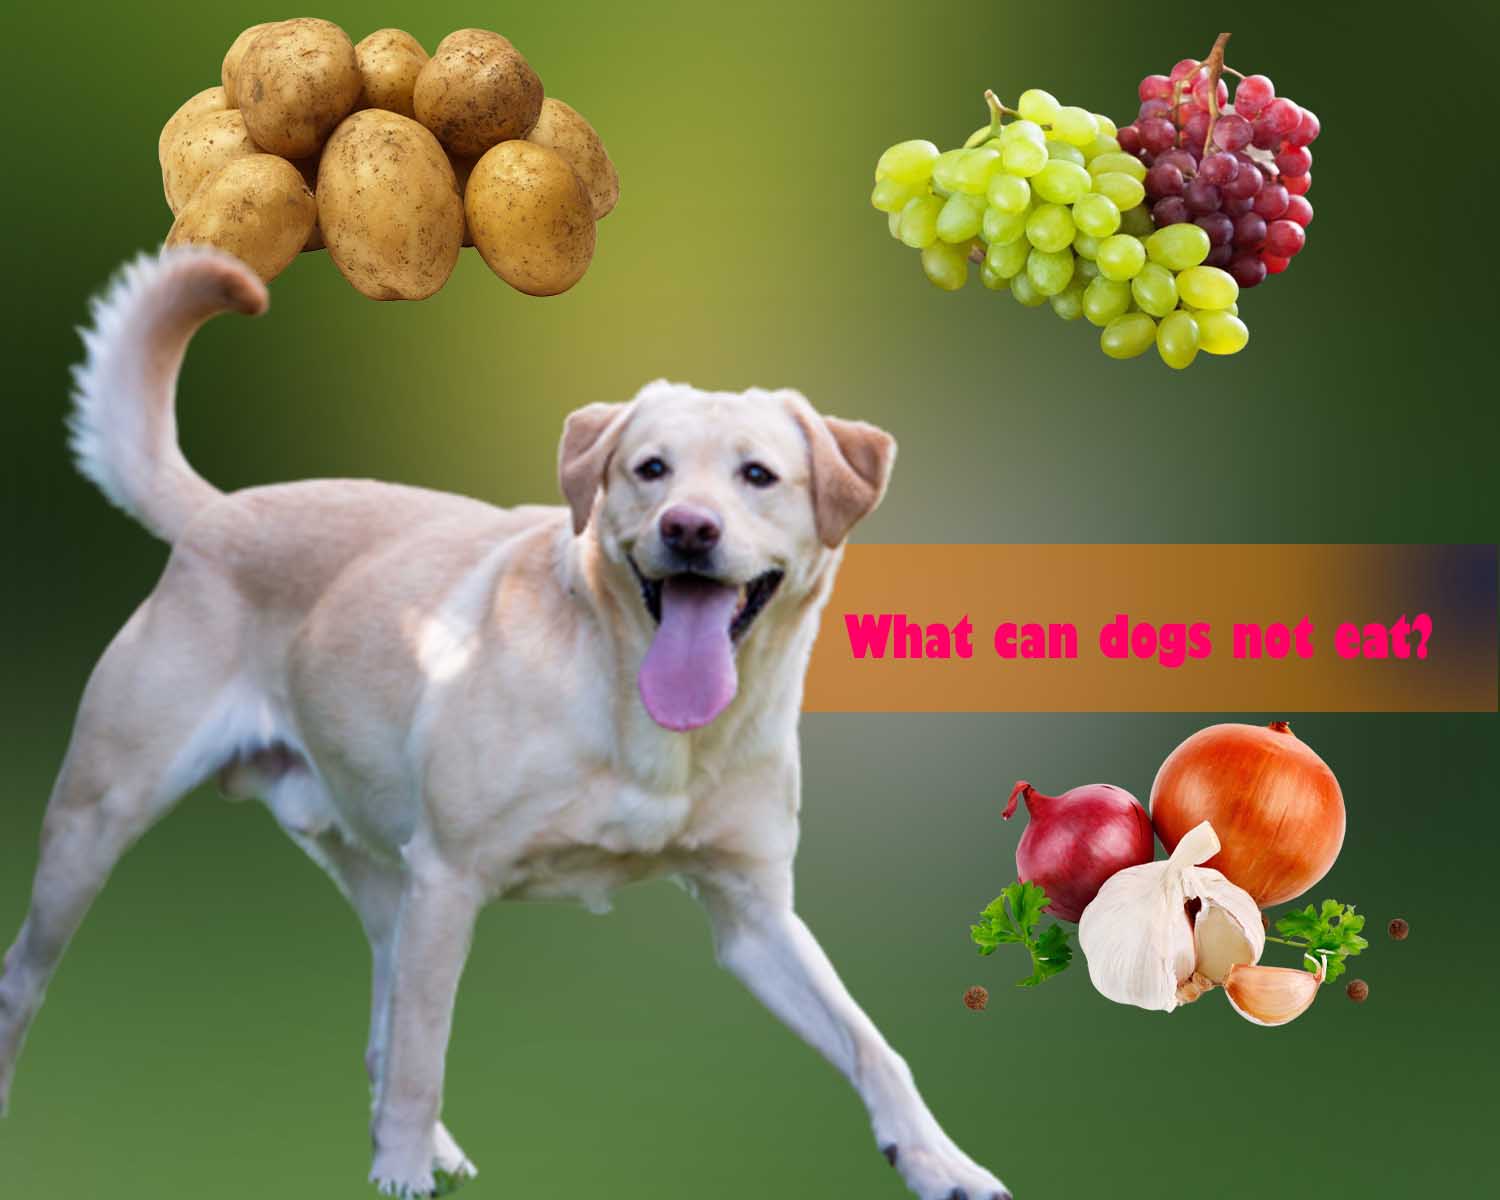 What can dogs not eat? What vegetables, fruits, foods?